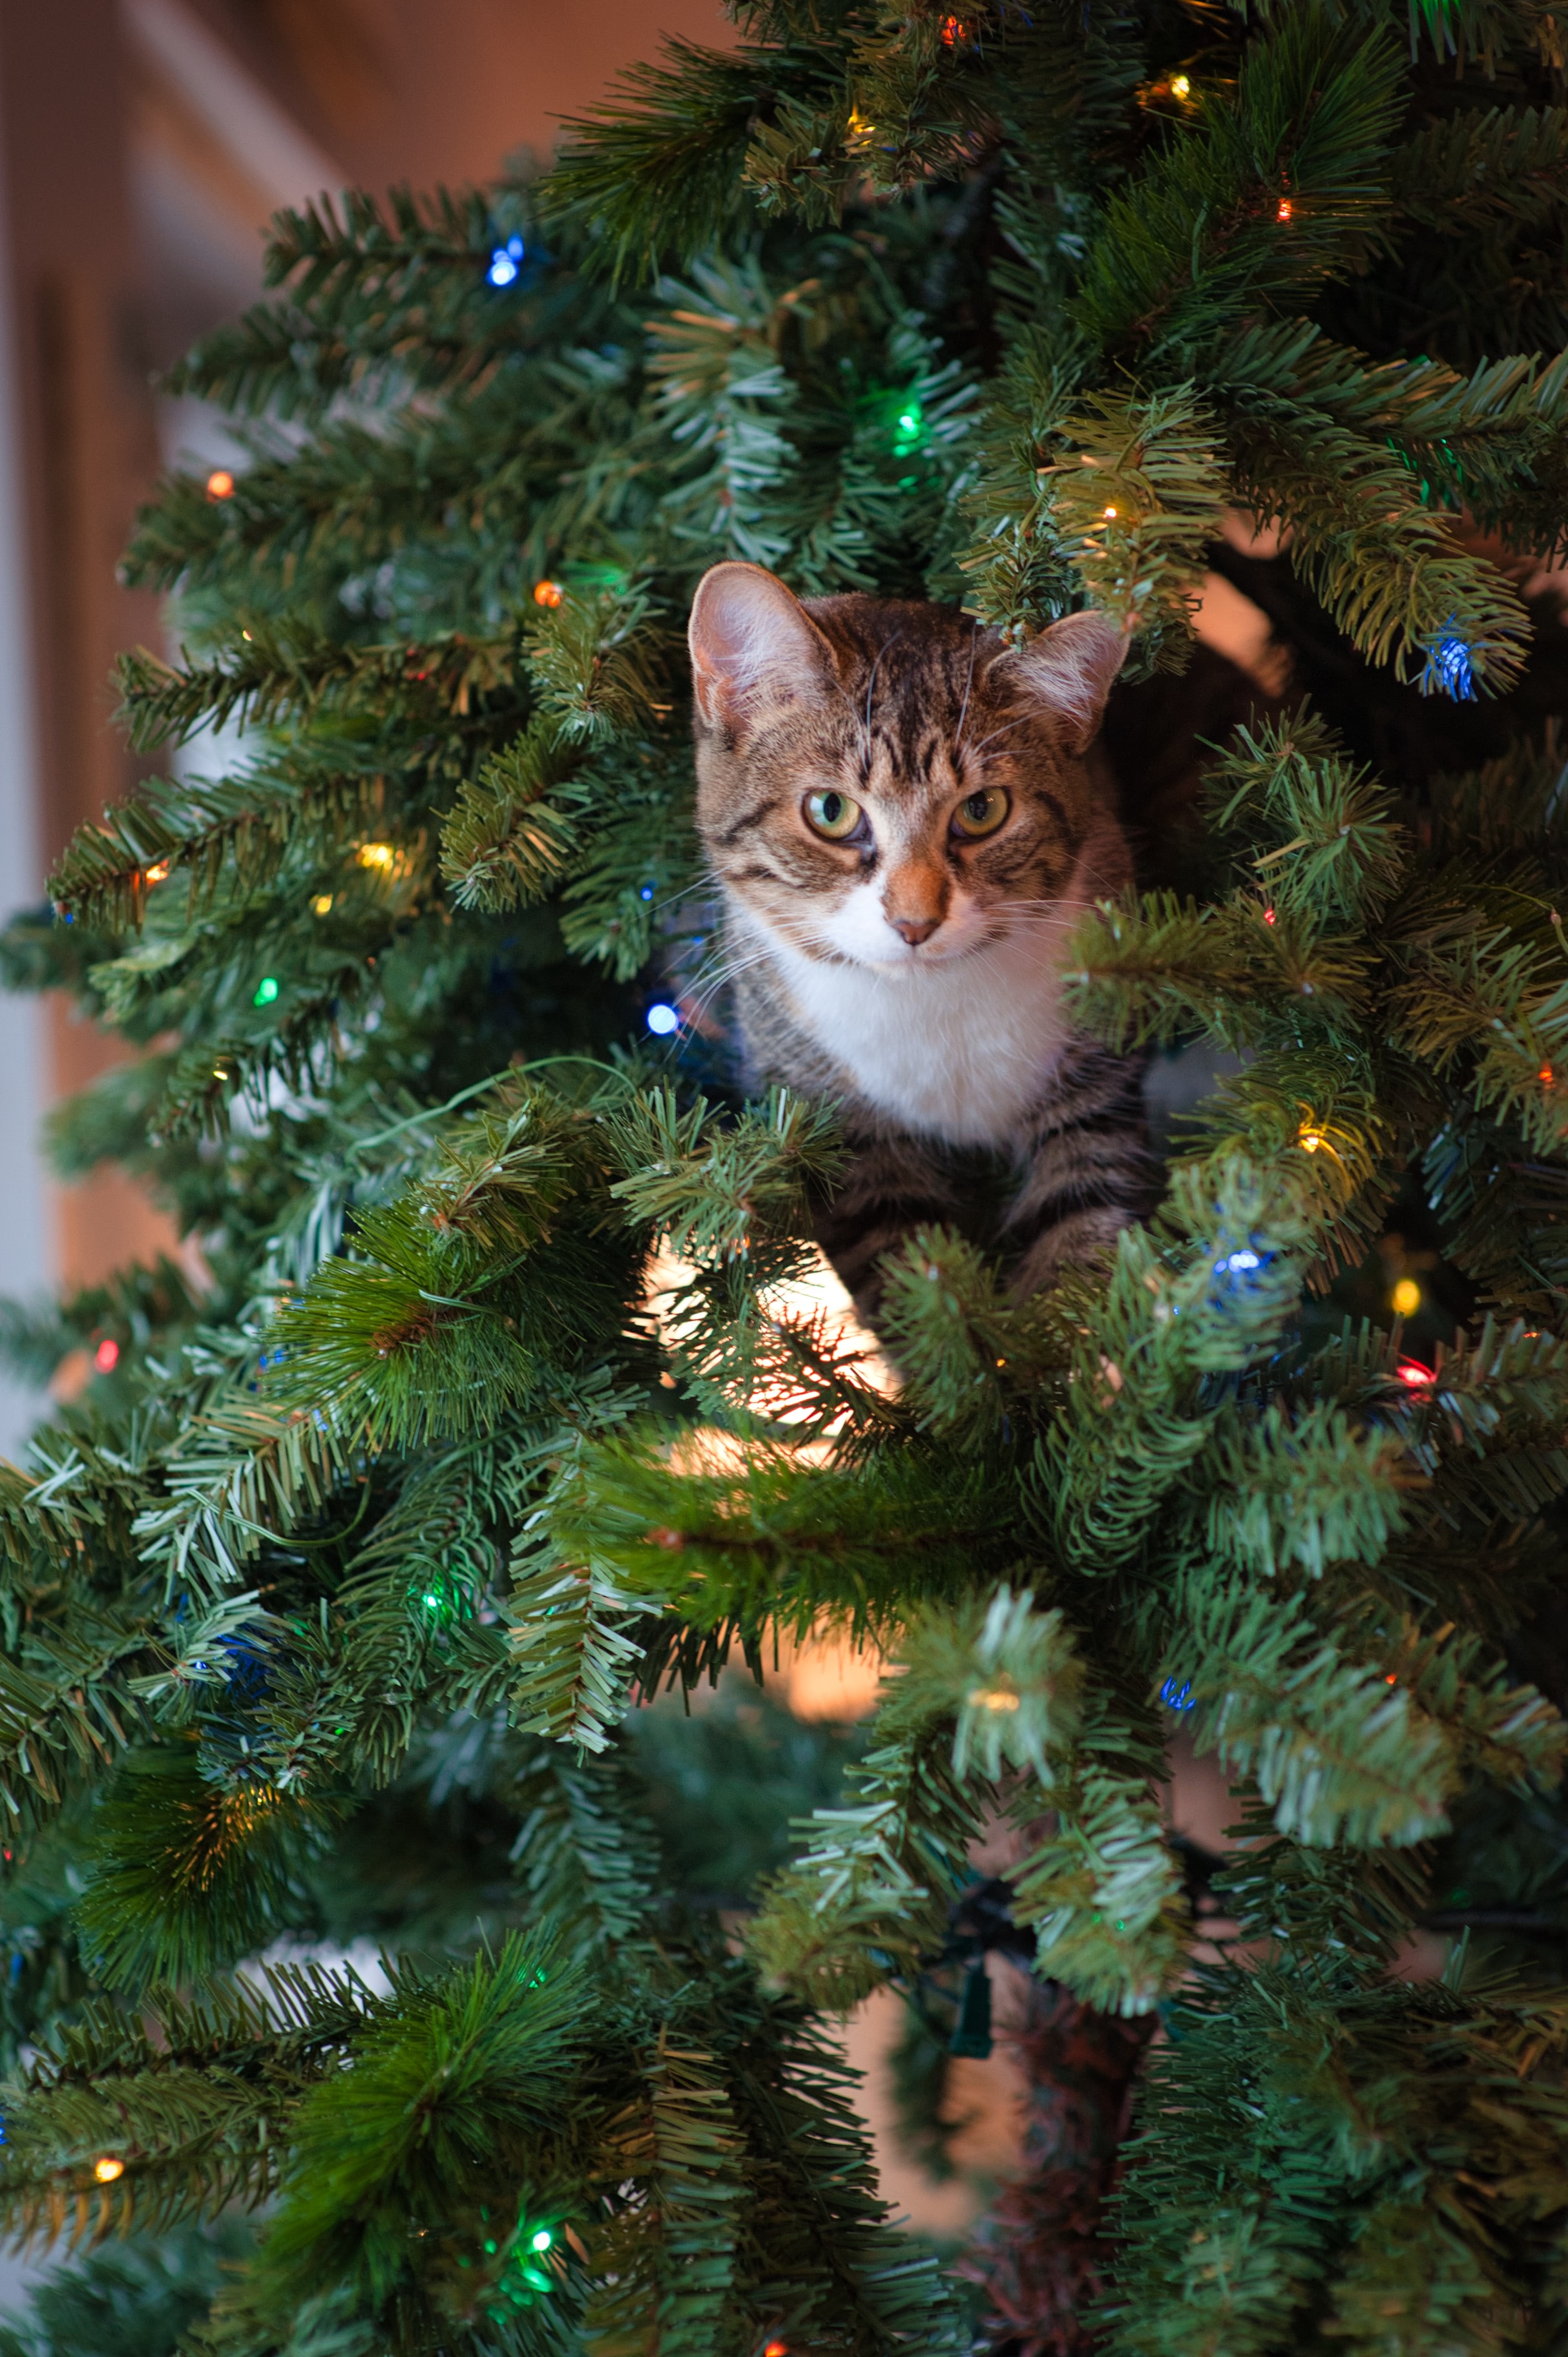 A cat looking out from the upper branches of a Christmas tree.